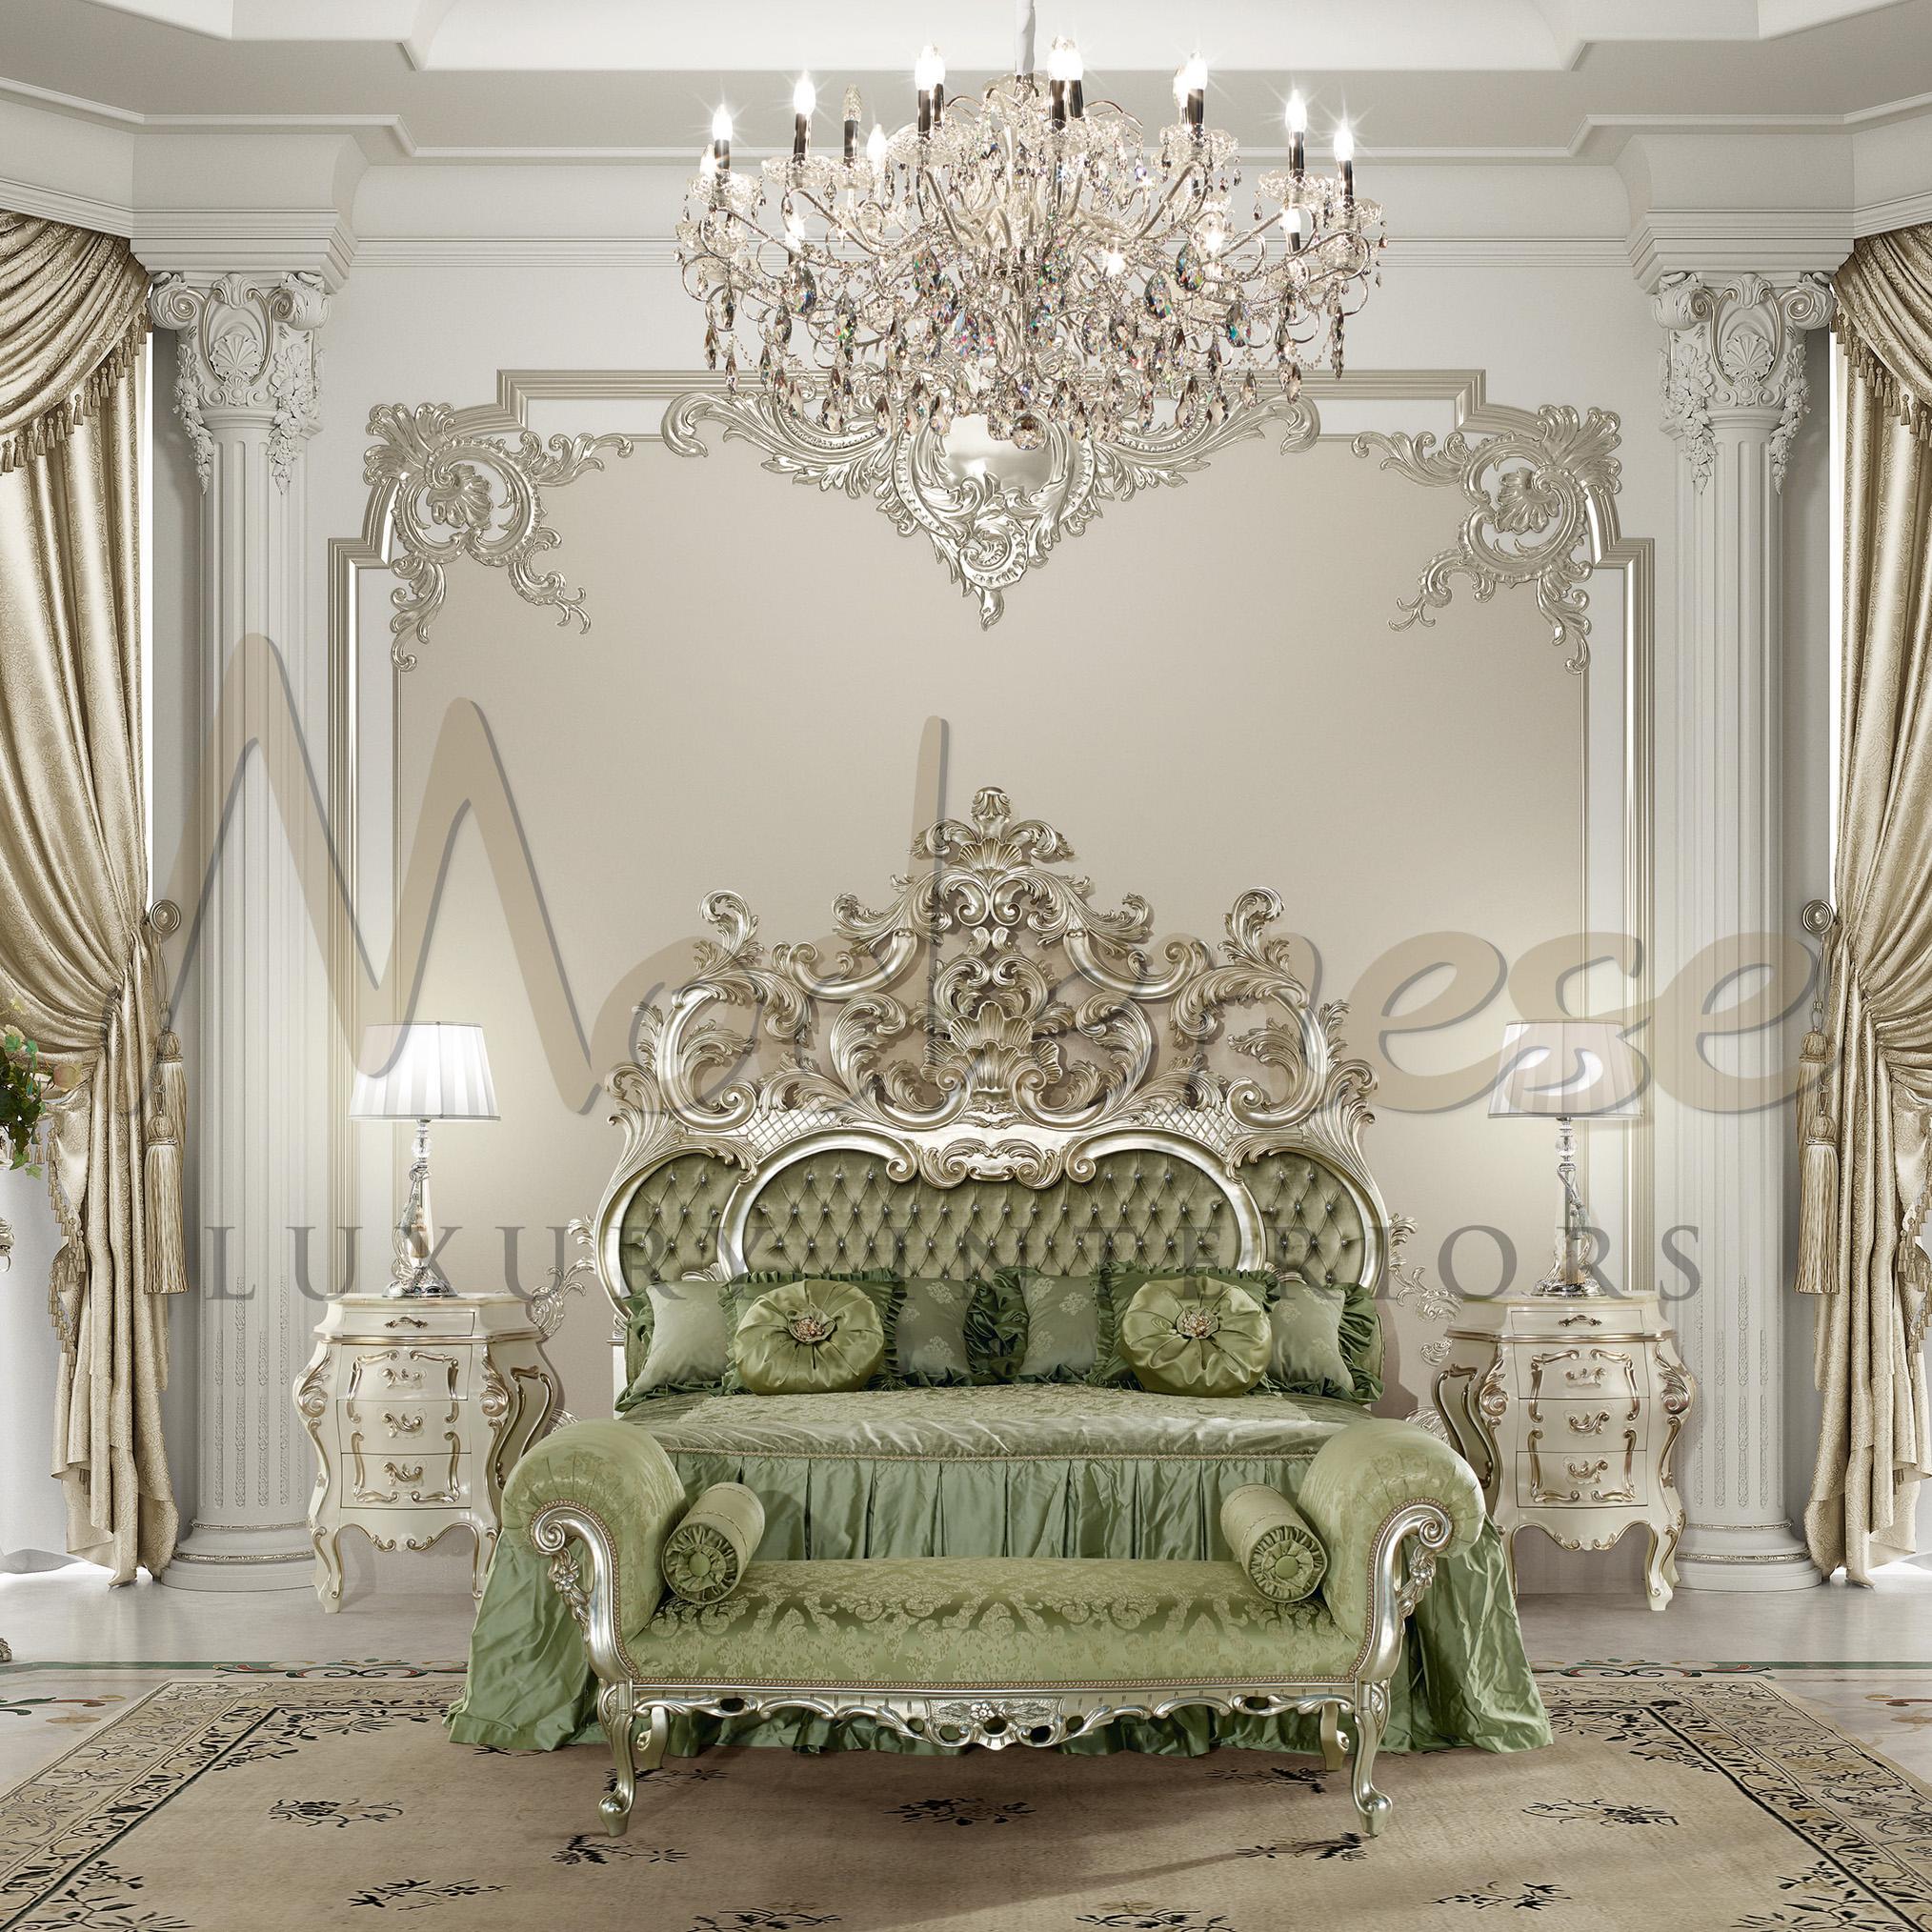 This bed is a true masterpiece: green tufted upholstered double bed with exclusive handcarved baroque headboard, completely decorated in silver leaf applications. Designed and produced by Modenese Gastone Interiors, italian furniture brand. Perfect